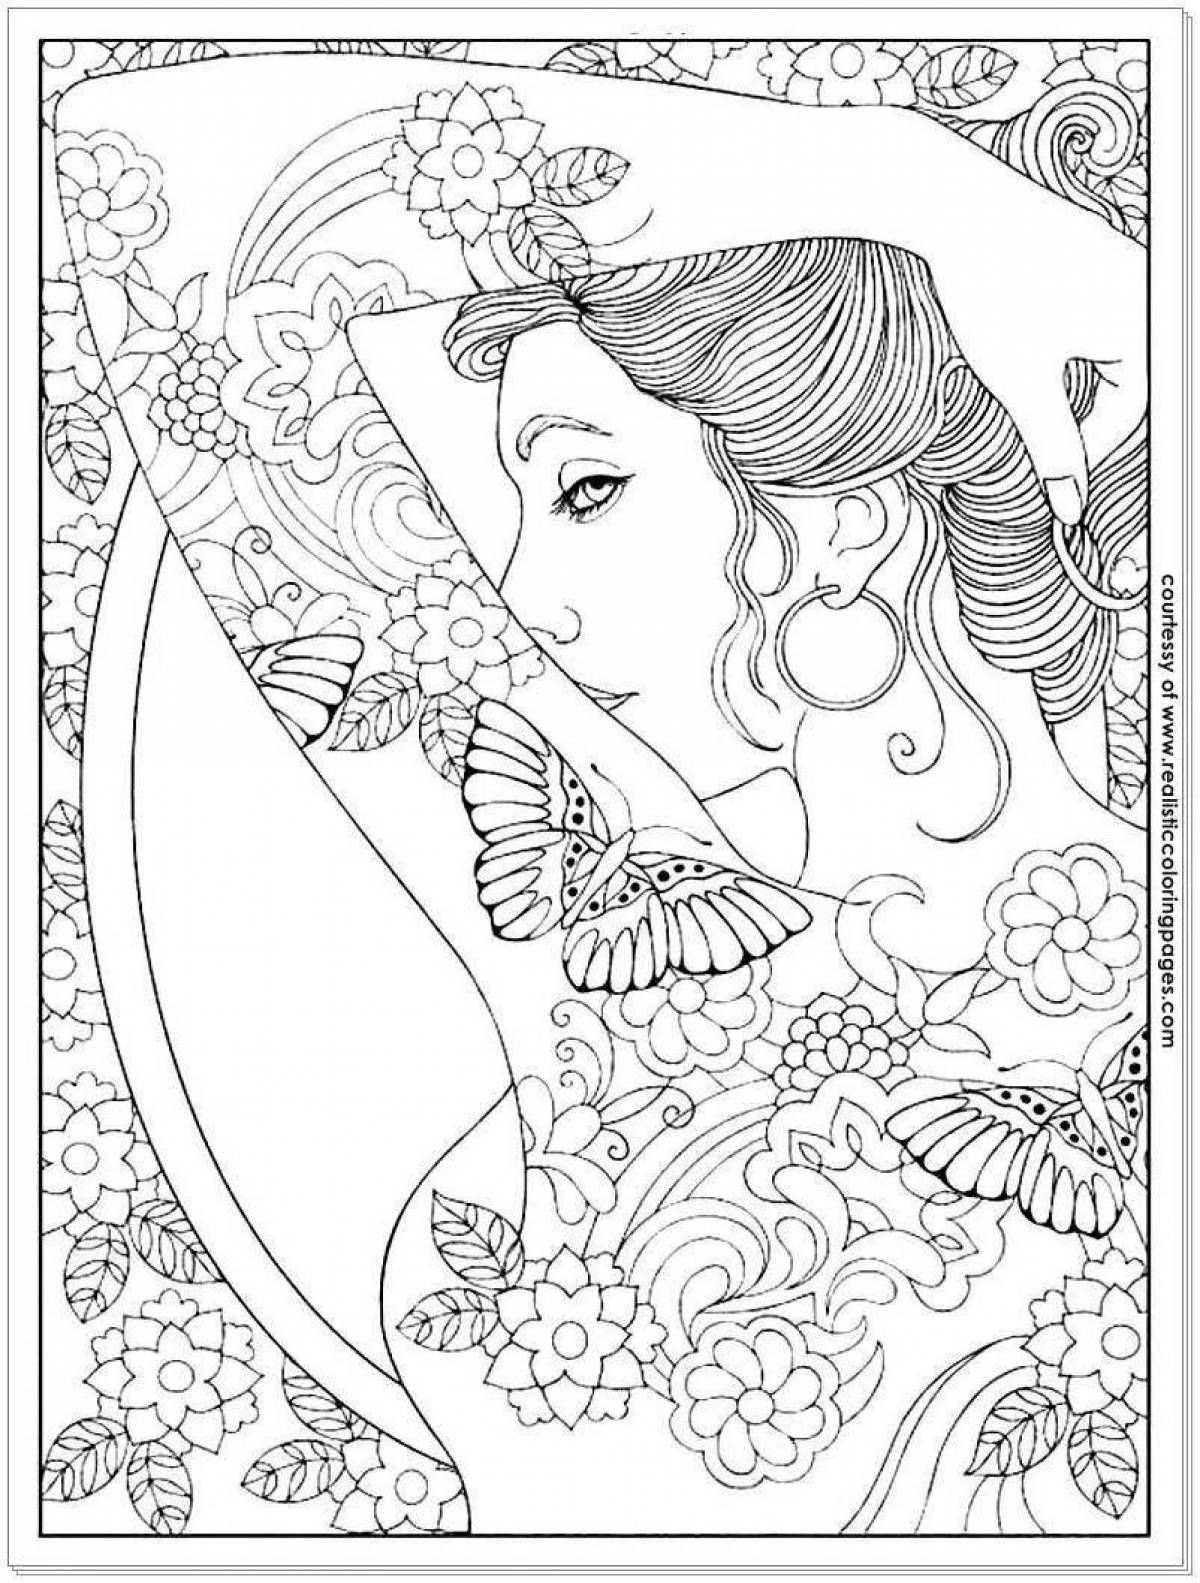 Artful modern coloring for adults